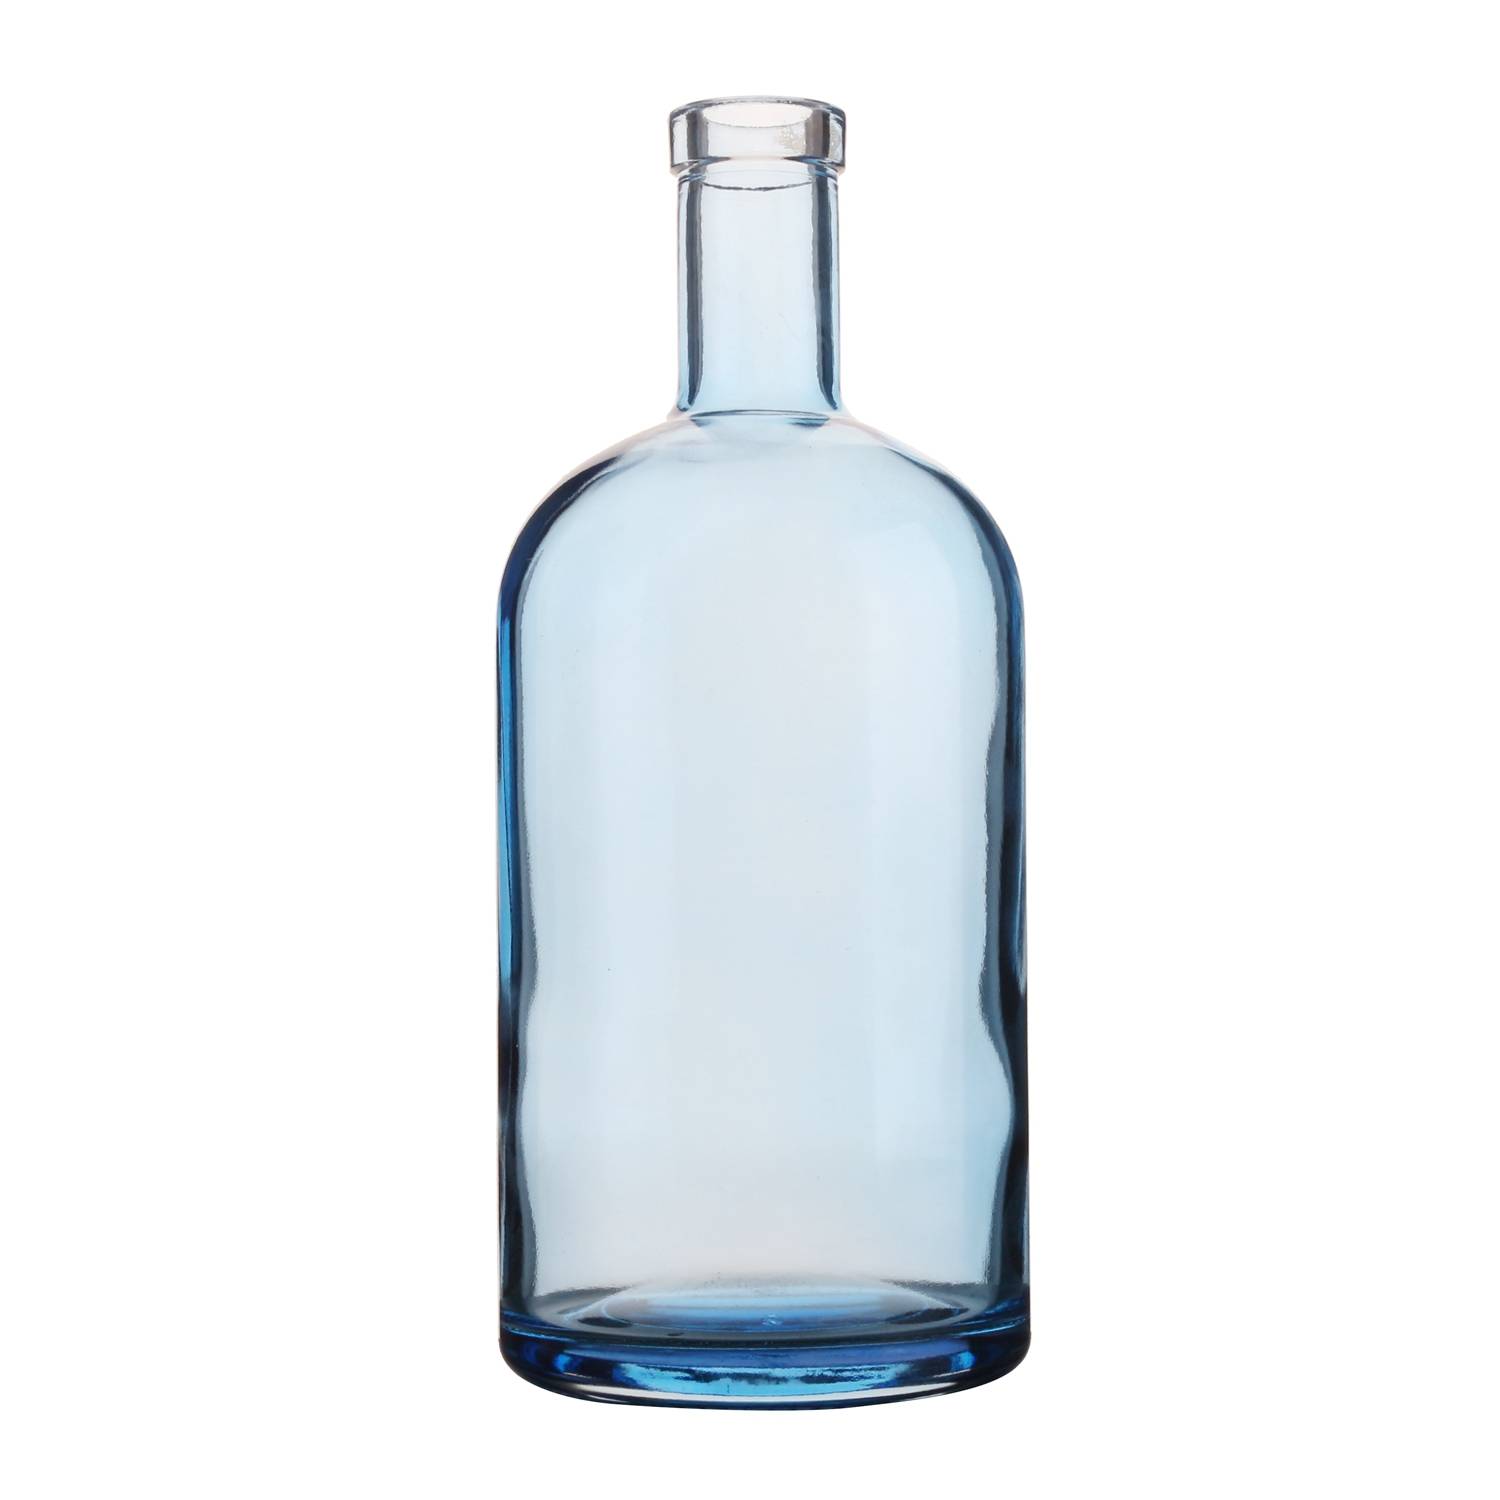 Custom 1000 ml color glass liquor bottle with cork lid Featured Image